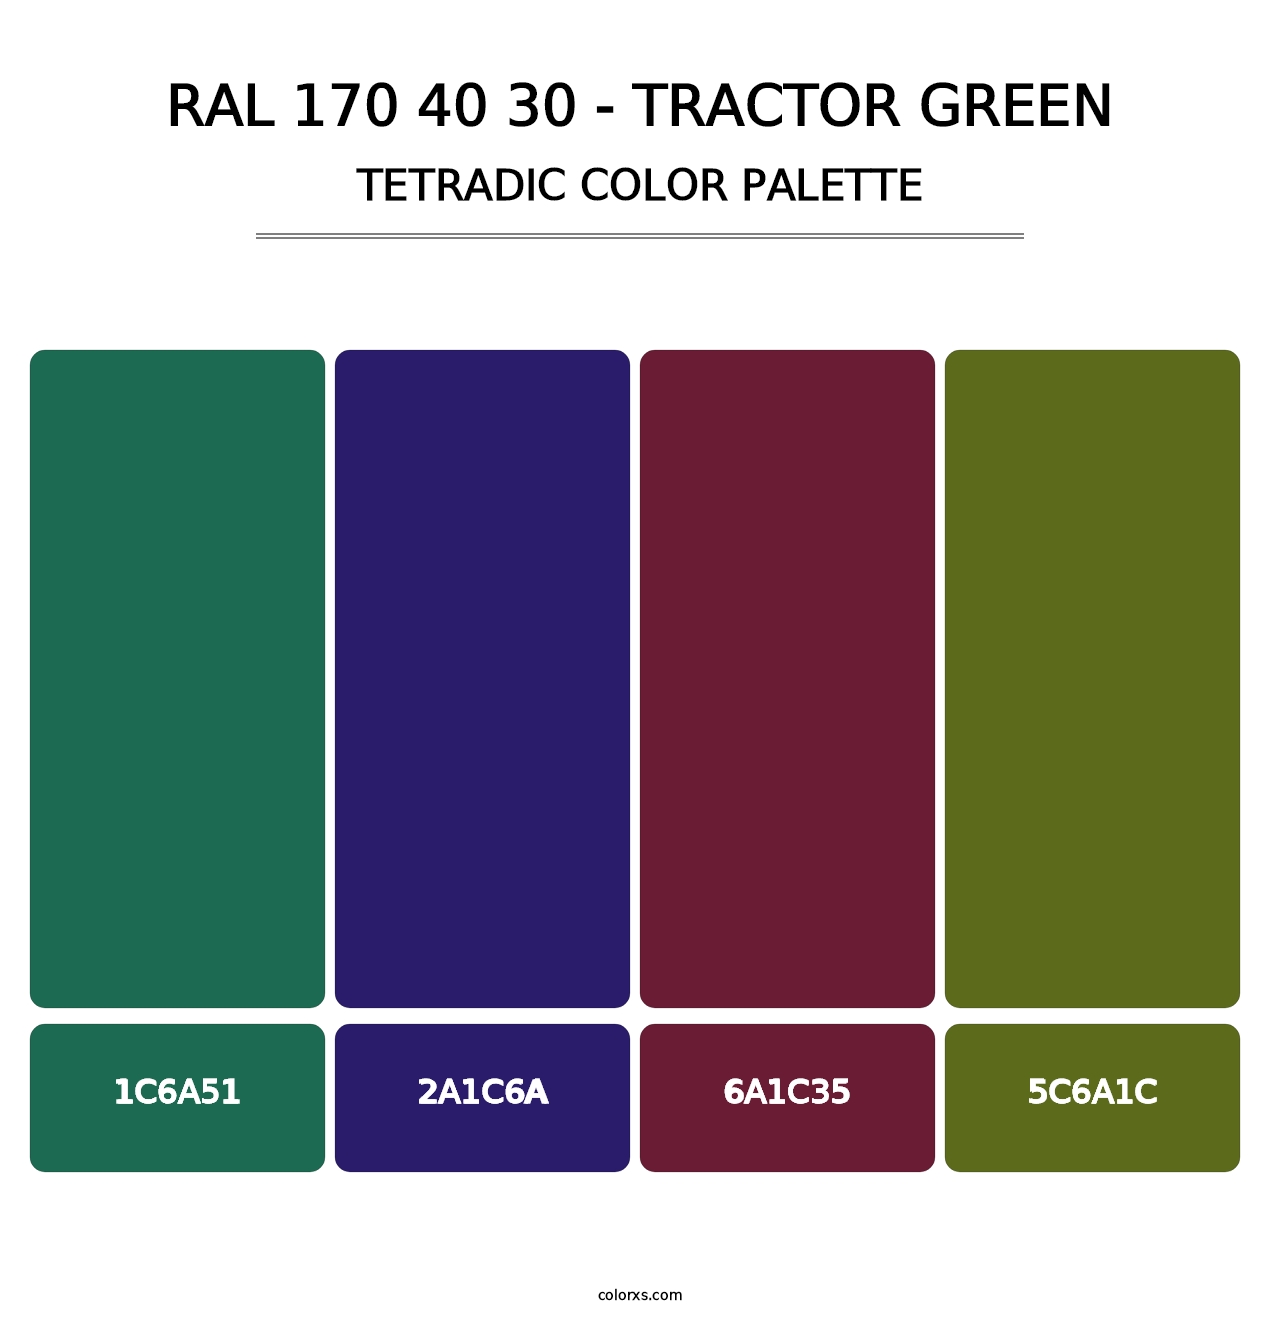 RAL 170 40 30 - Tractor Green - Tetradic Color Palette